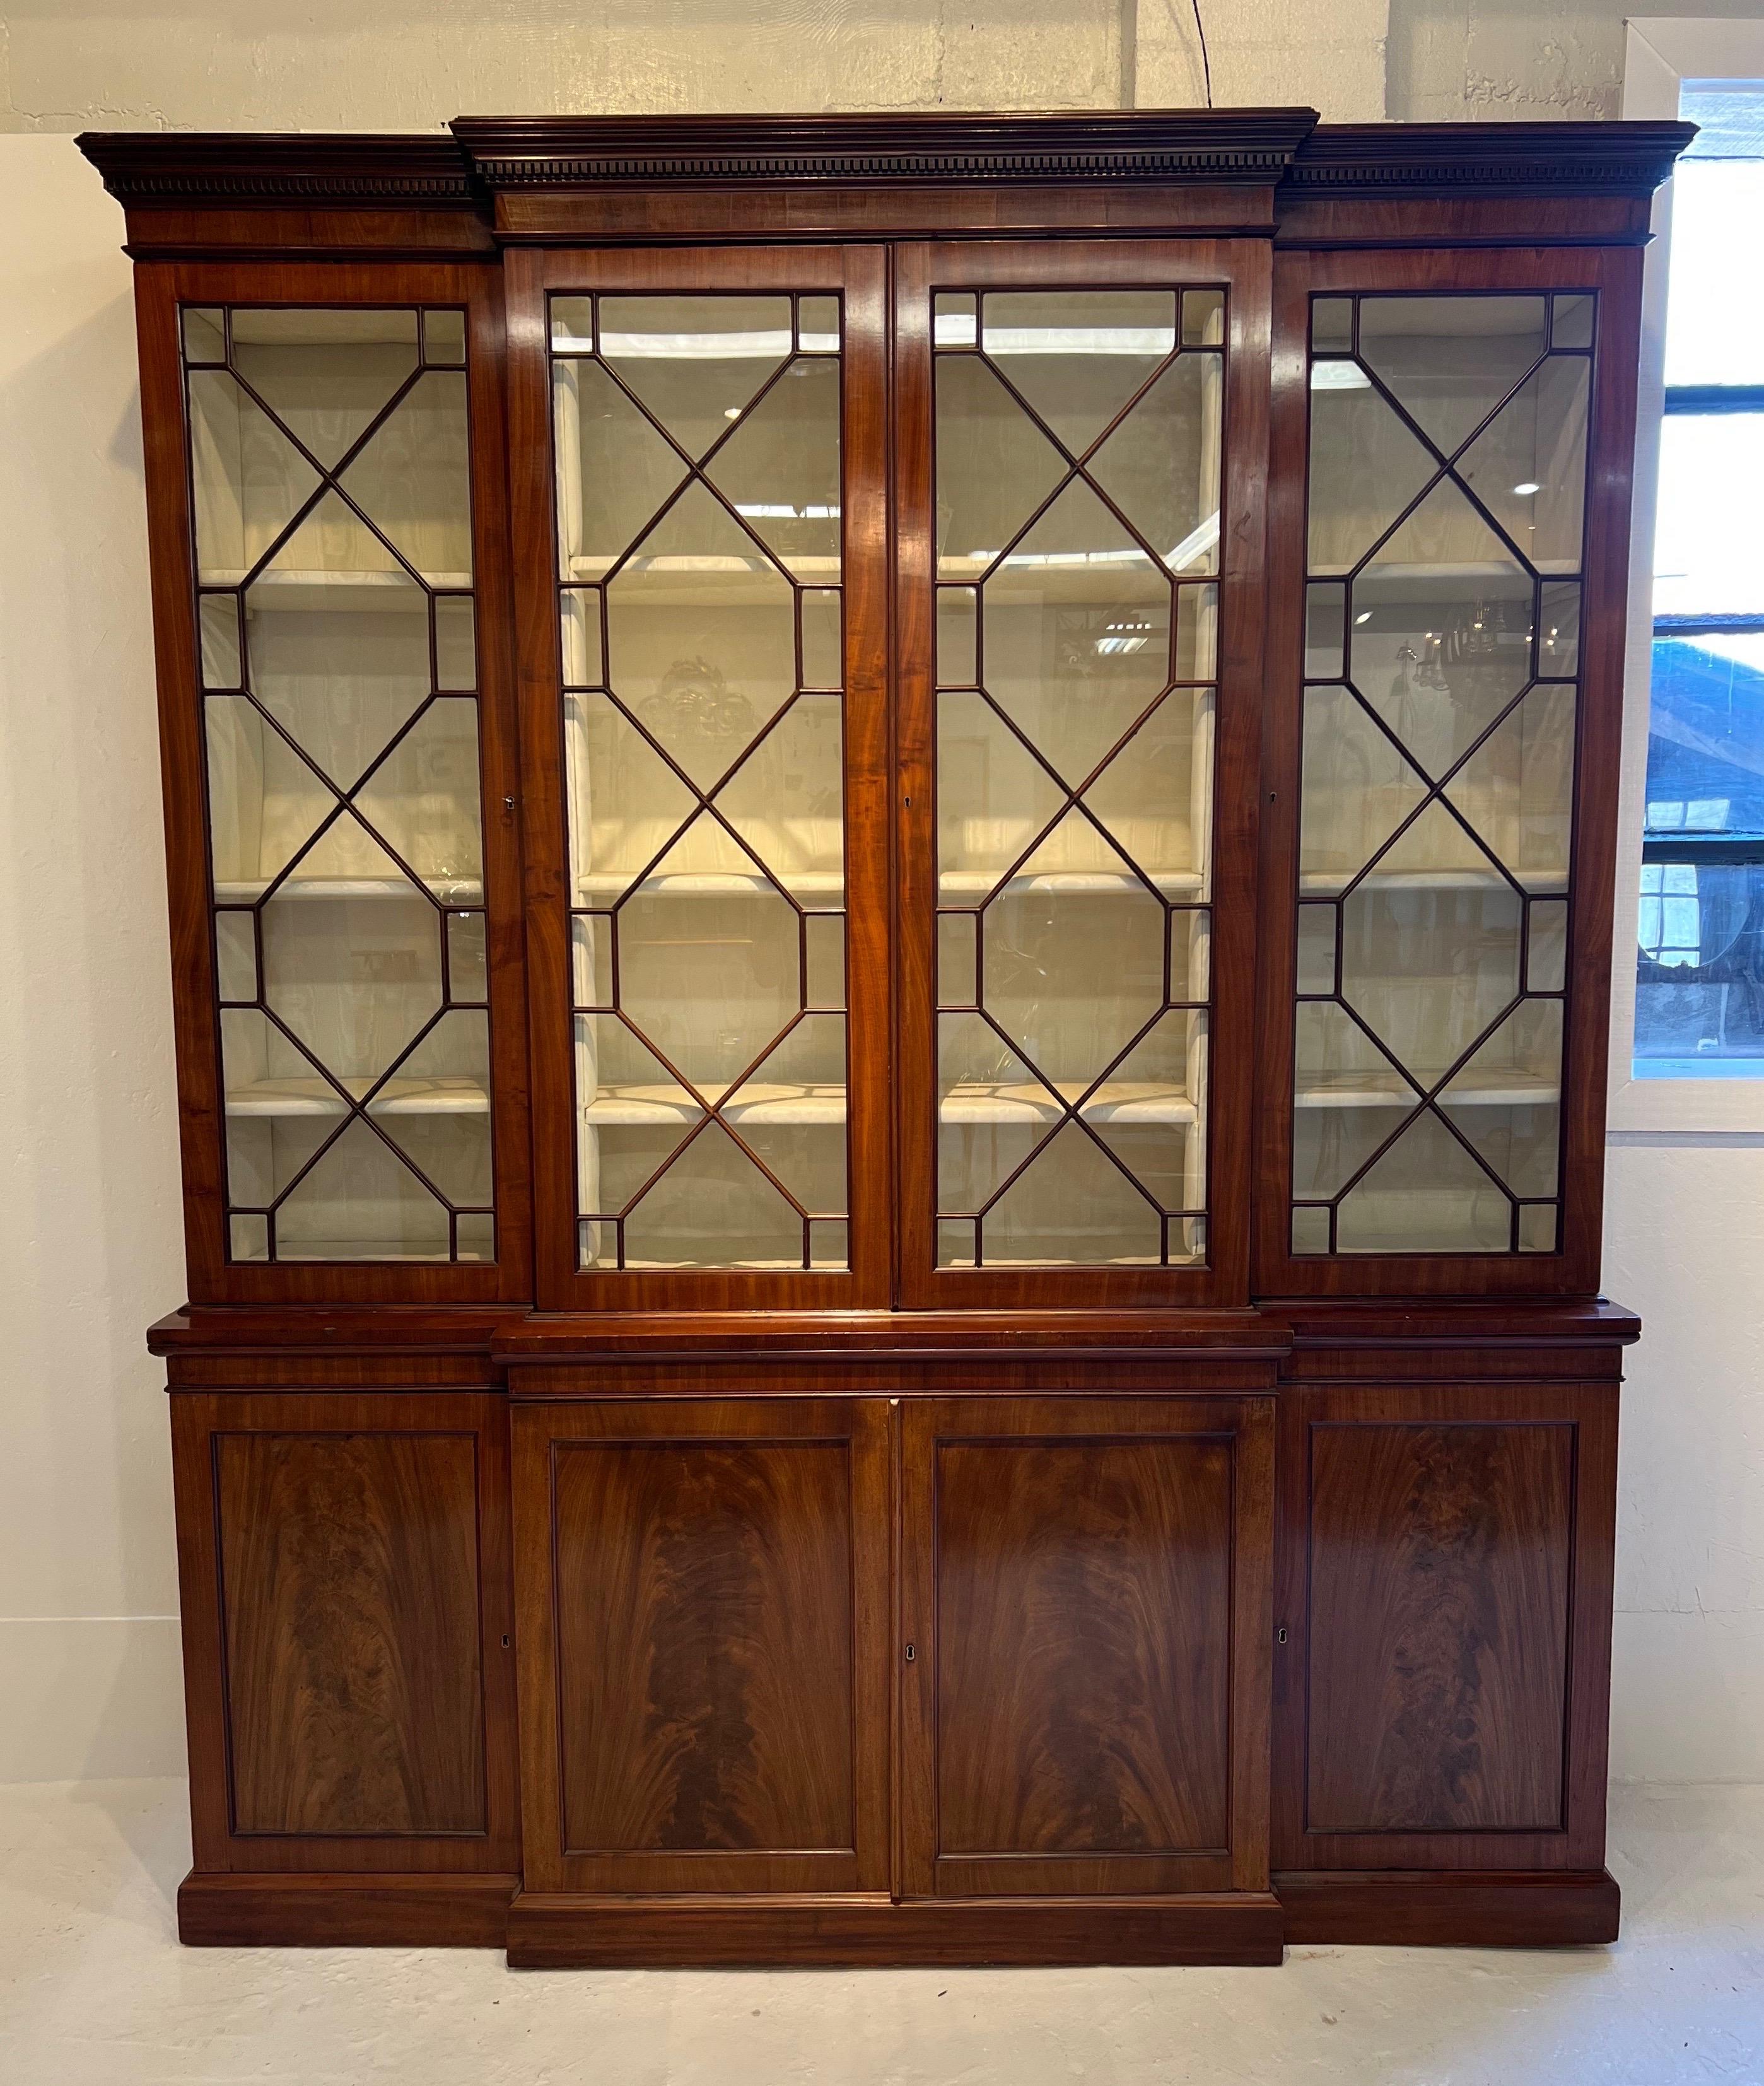 Fine 18th century Georgian mahogany breakfront bookcase on a plinth base with linen slides in the base and lined interior seem behind the glazed doors of the top. Warm color with highly figured panels. Interior lighting has been added when the silk